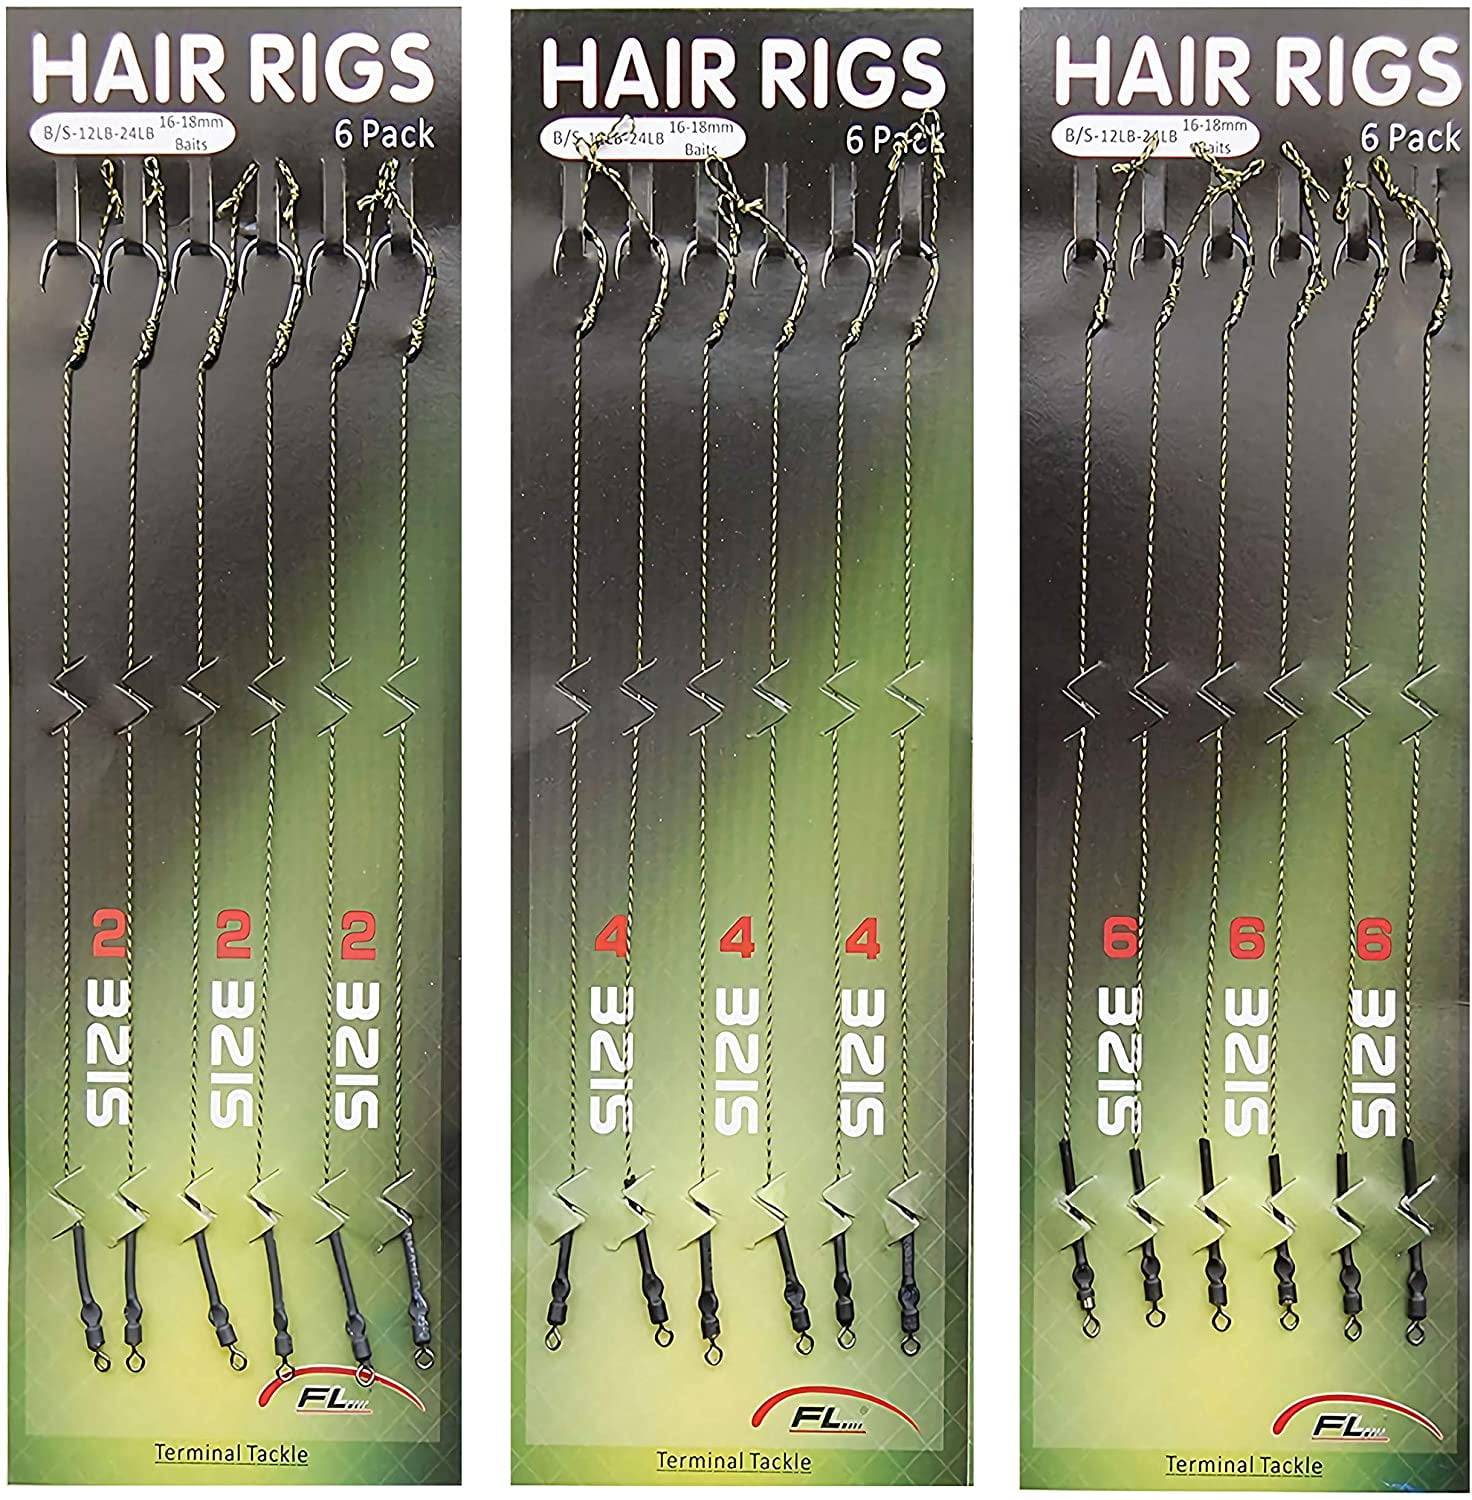 Carp Fishing Hair Rigs Kit,18pcs Braided Thread Boilies Carp Rigs with 3  Extender Boilie Bait Stops and Stringer Needle